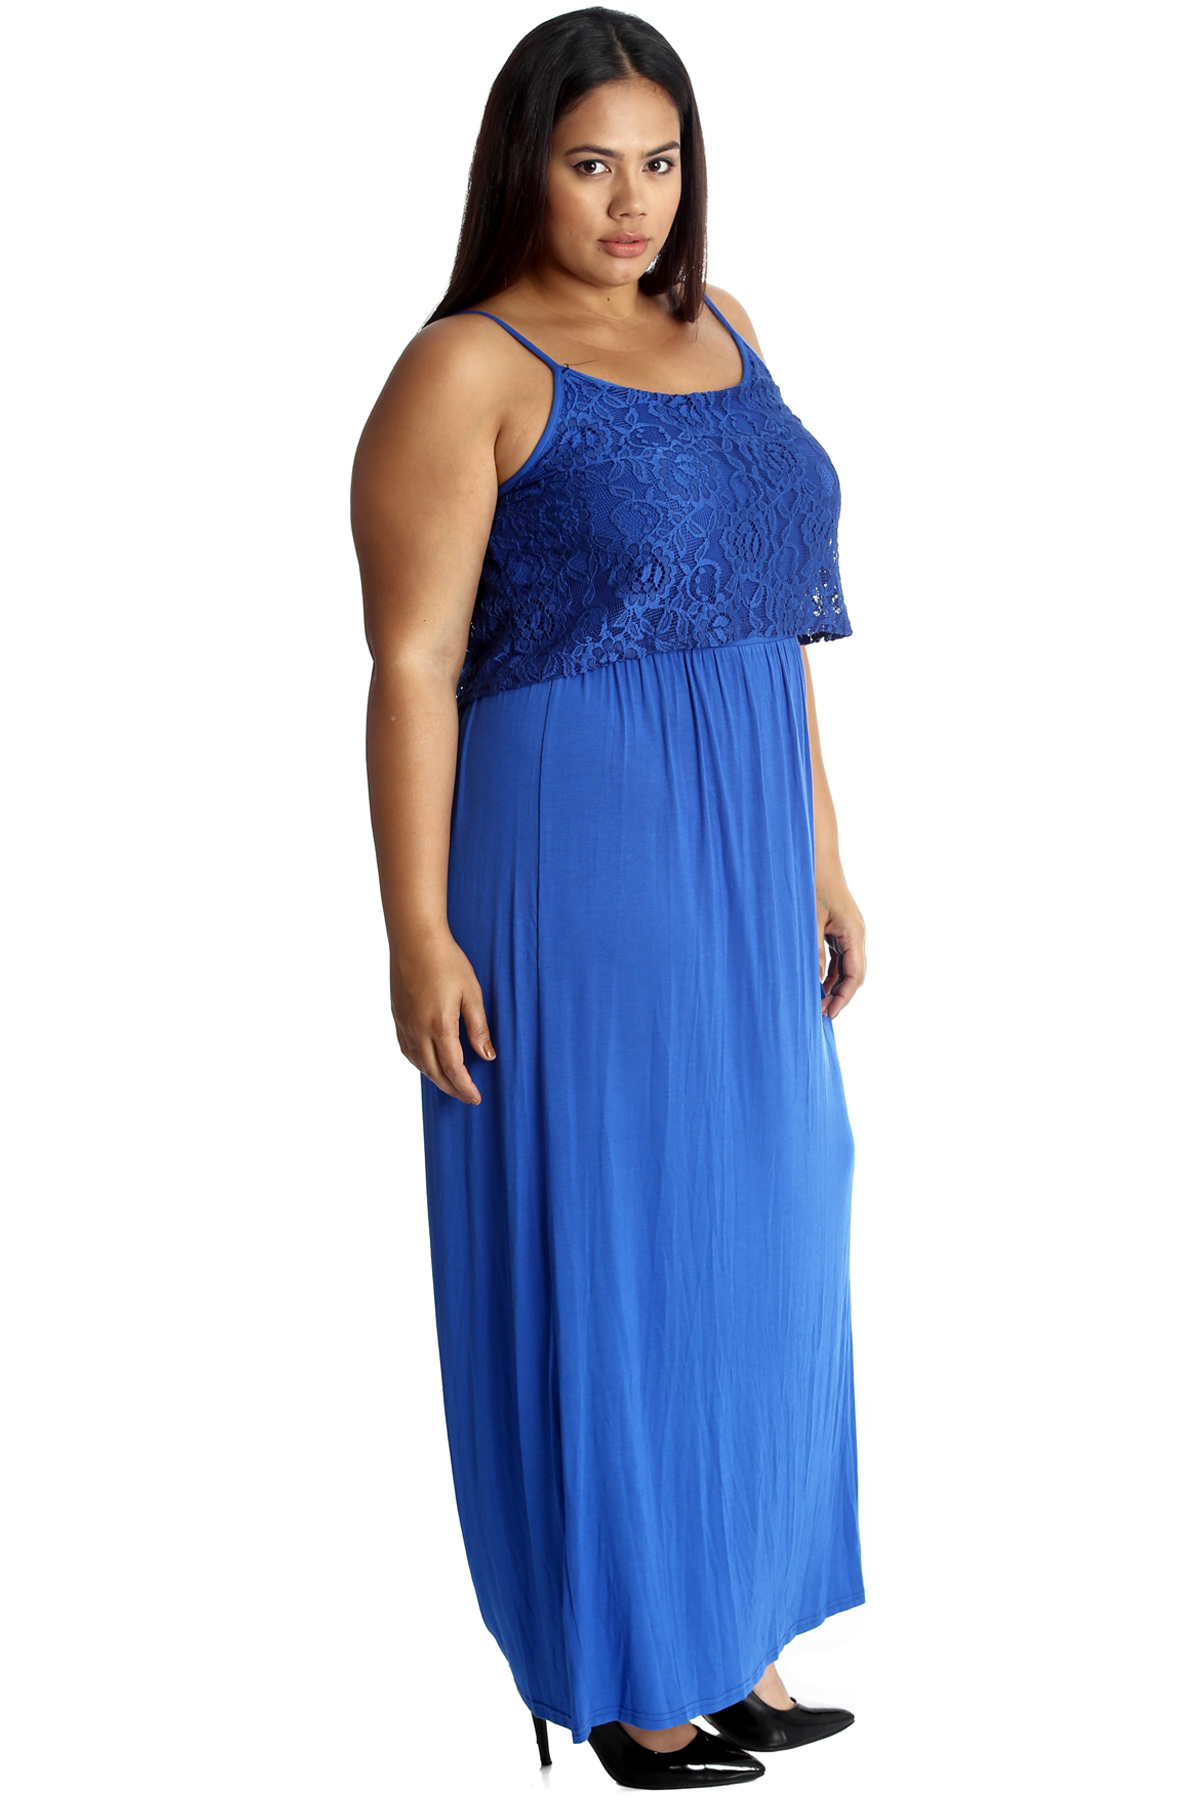 New Womens Dress Plus Size Maxi Ladies Floral Lace Full Length Sleeveless Summer Ebay